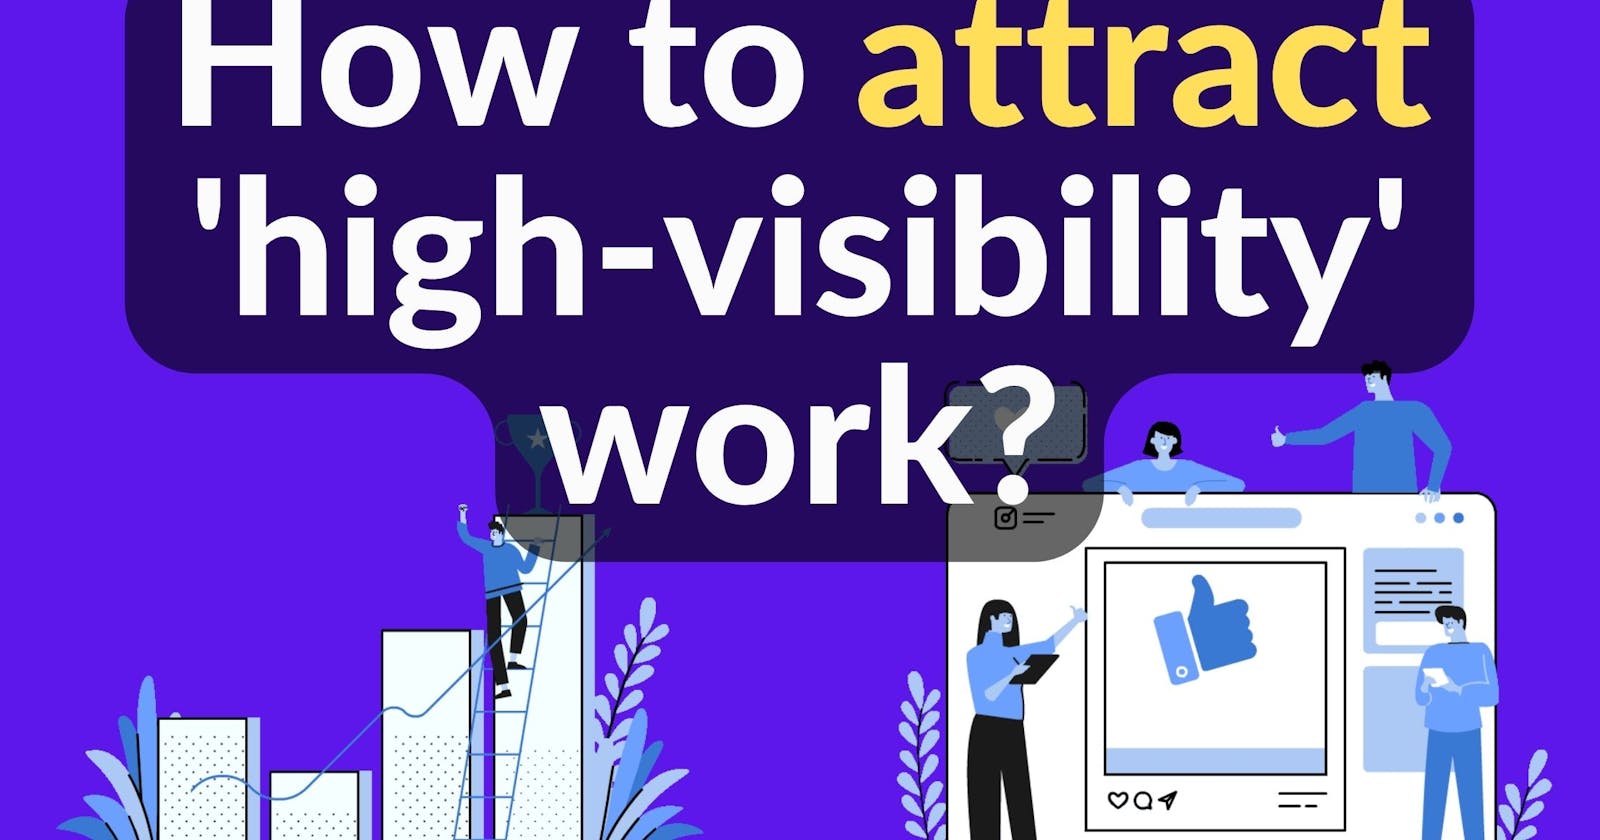 How to attract 'high-visibility' projects at work